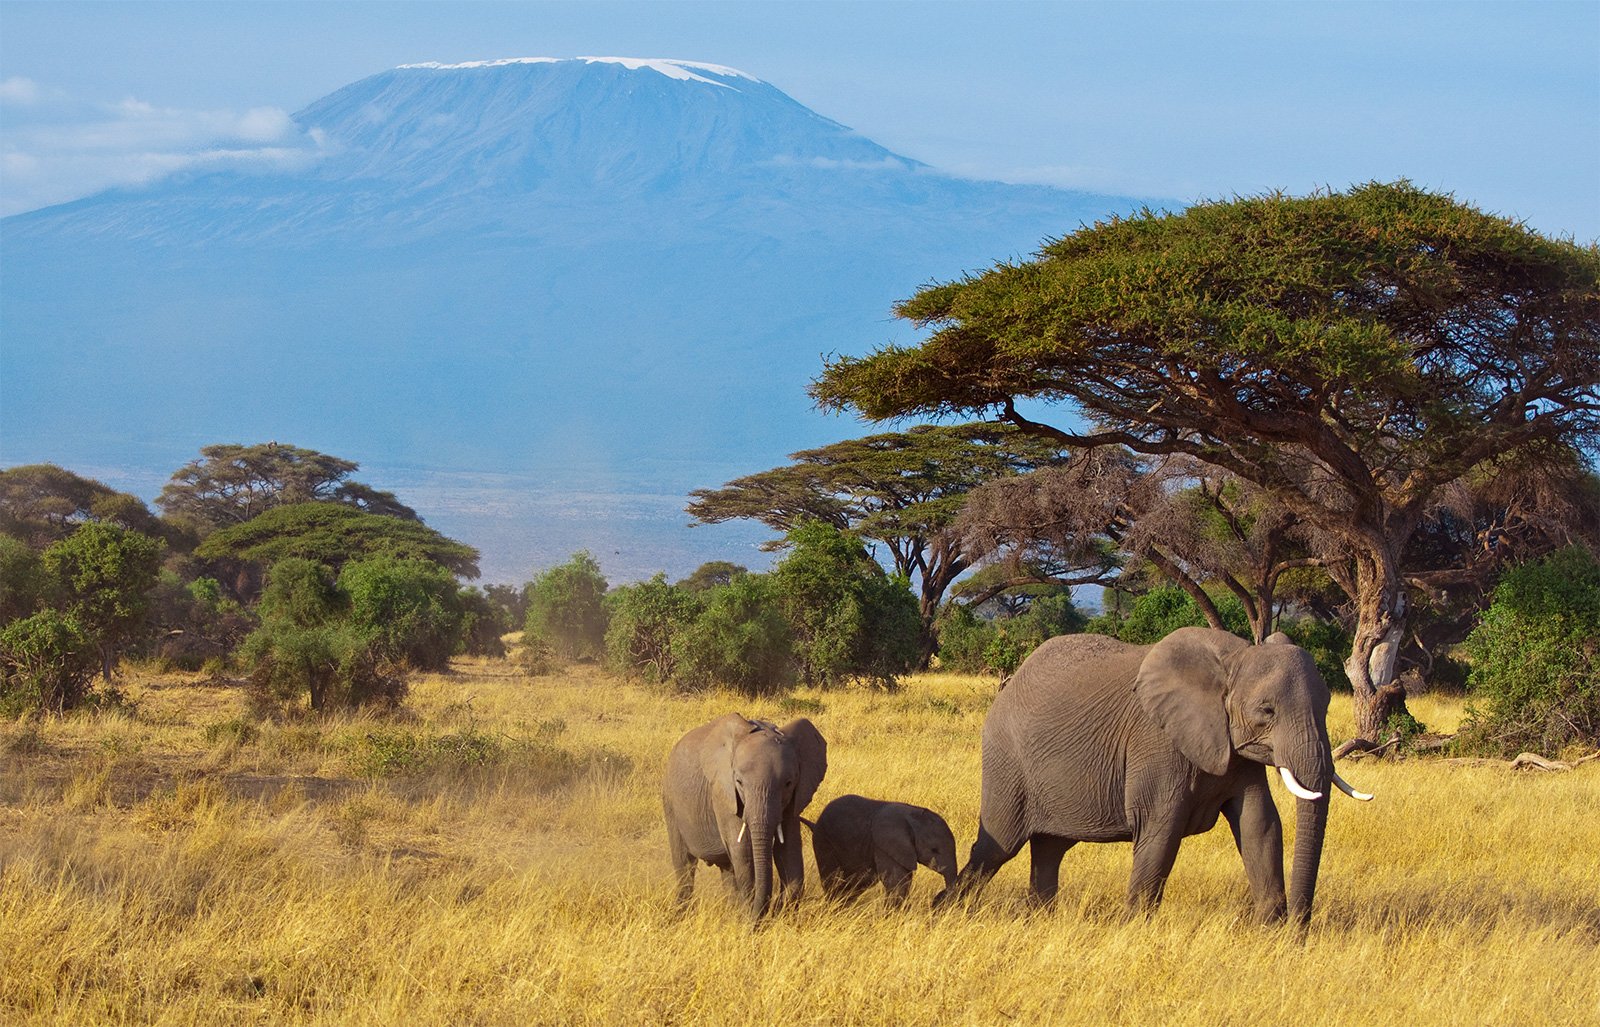 Big Report on African Elephants Offers New Spin on the Same Problems